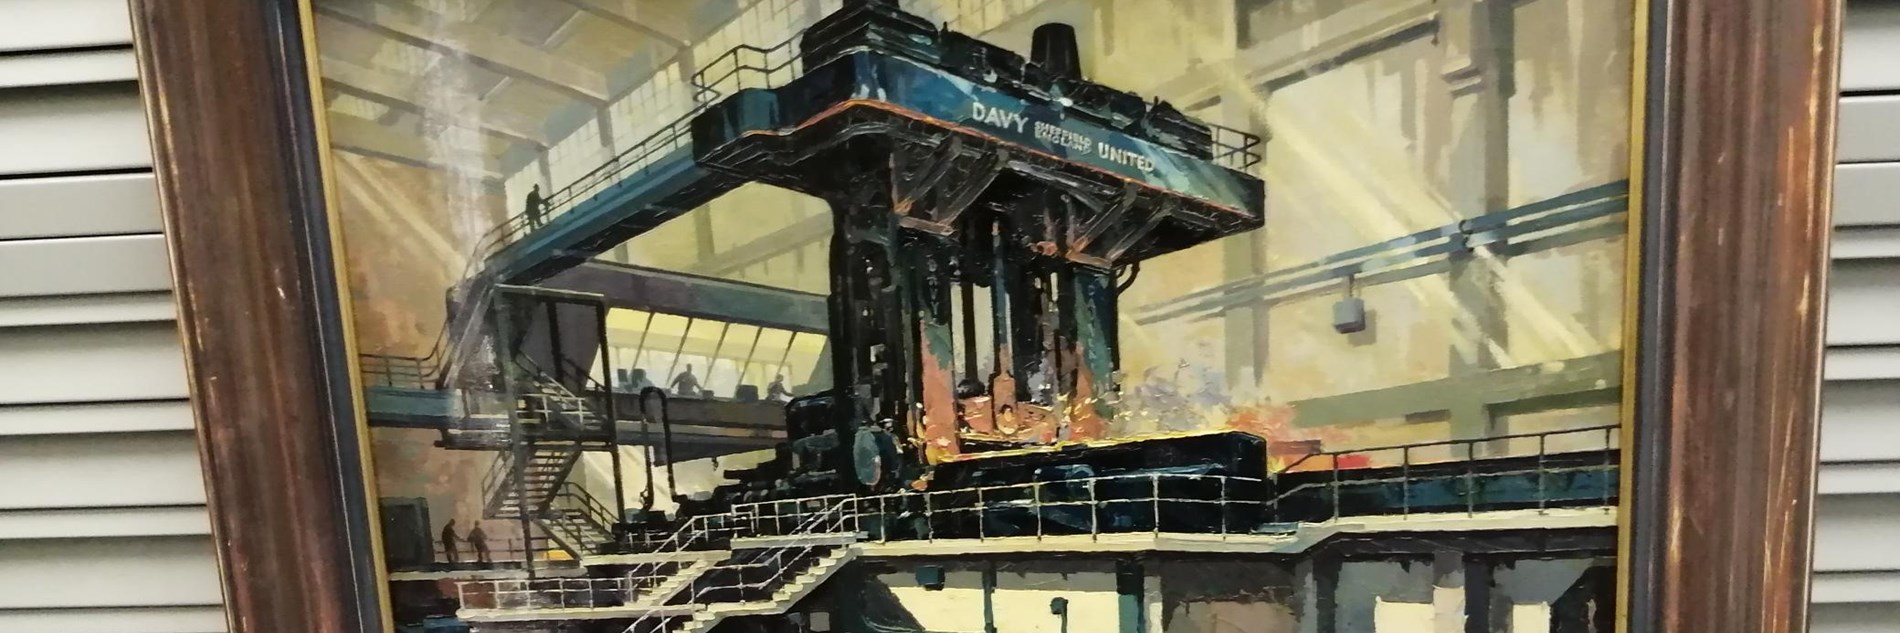 An oil painting depicting heavy industrial machinery at work. The painting is in a brown wooden frame.  